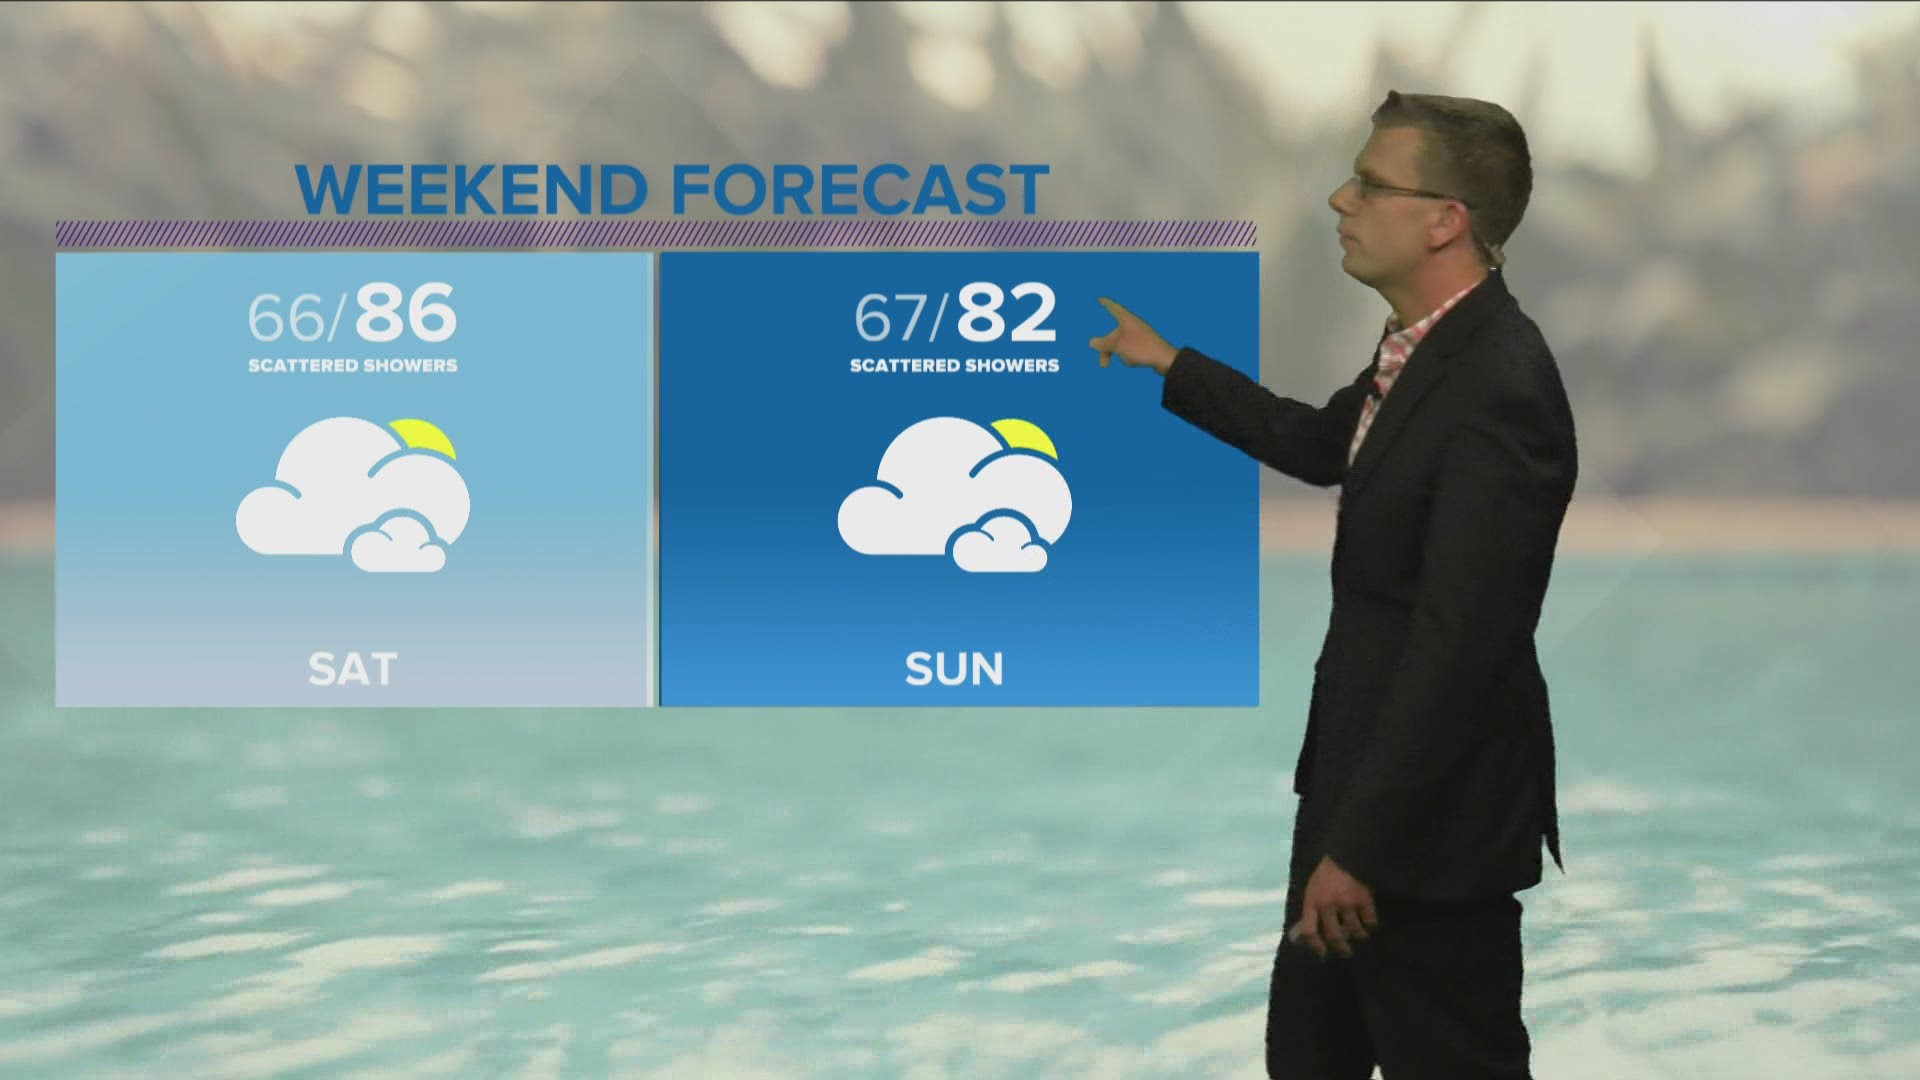 Scattered showers will be possible this weekend